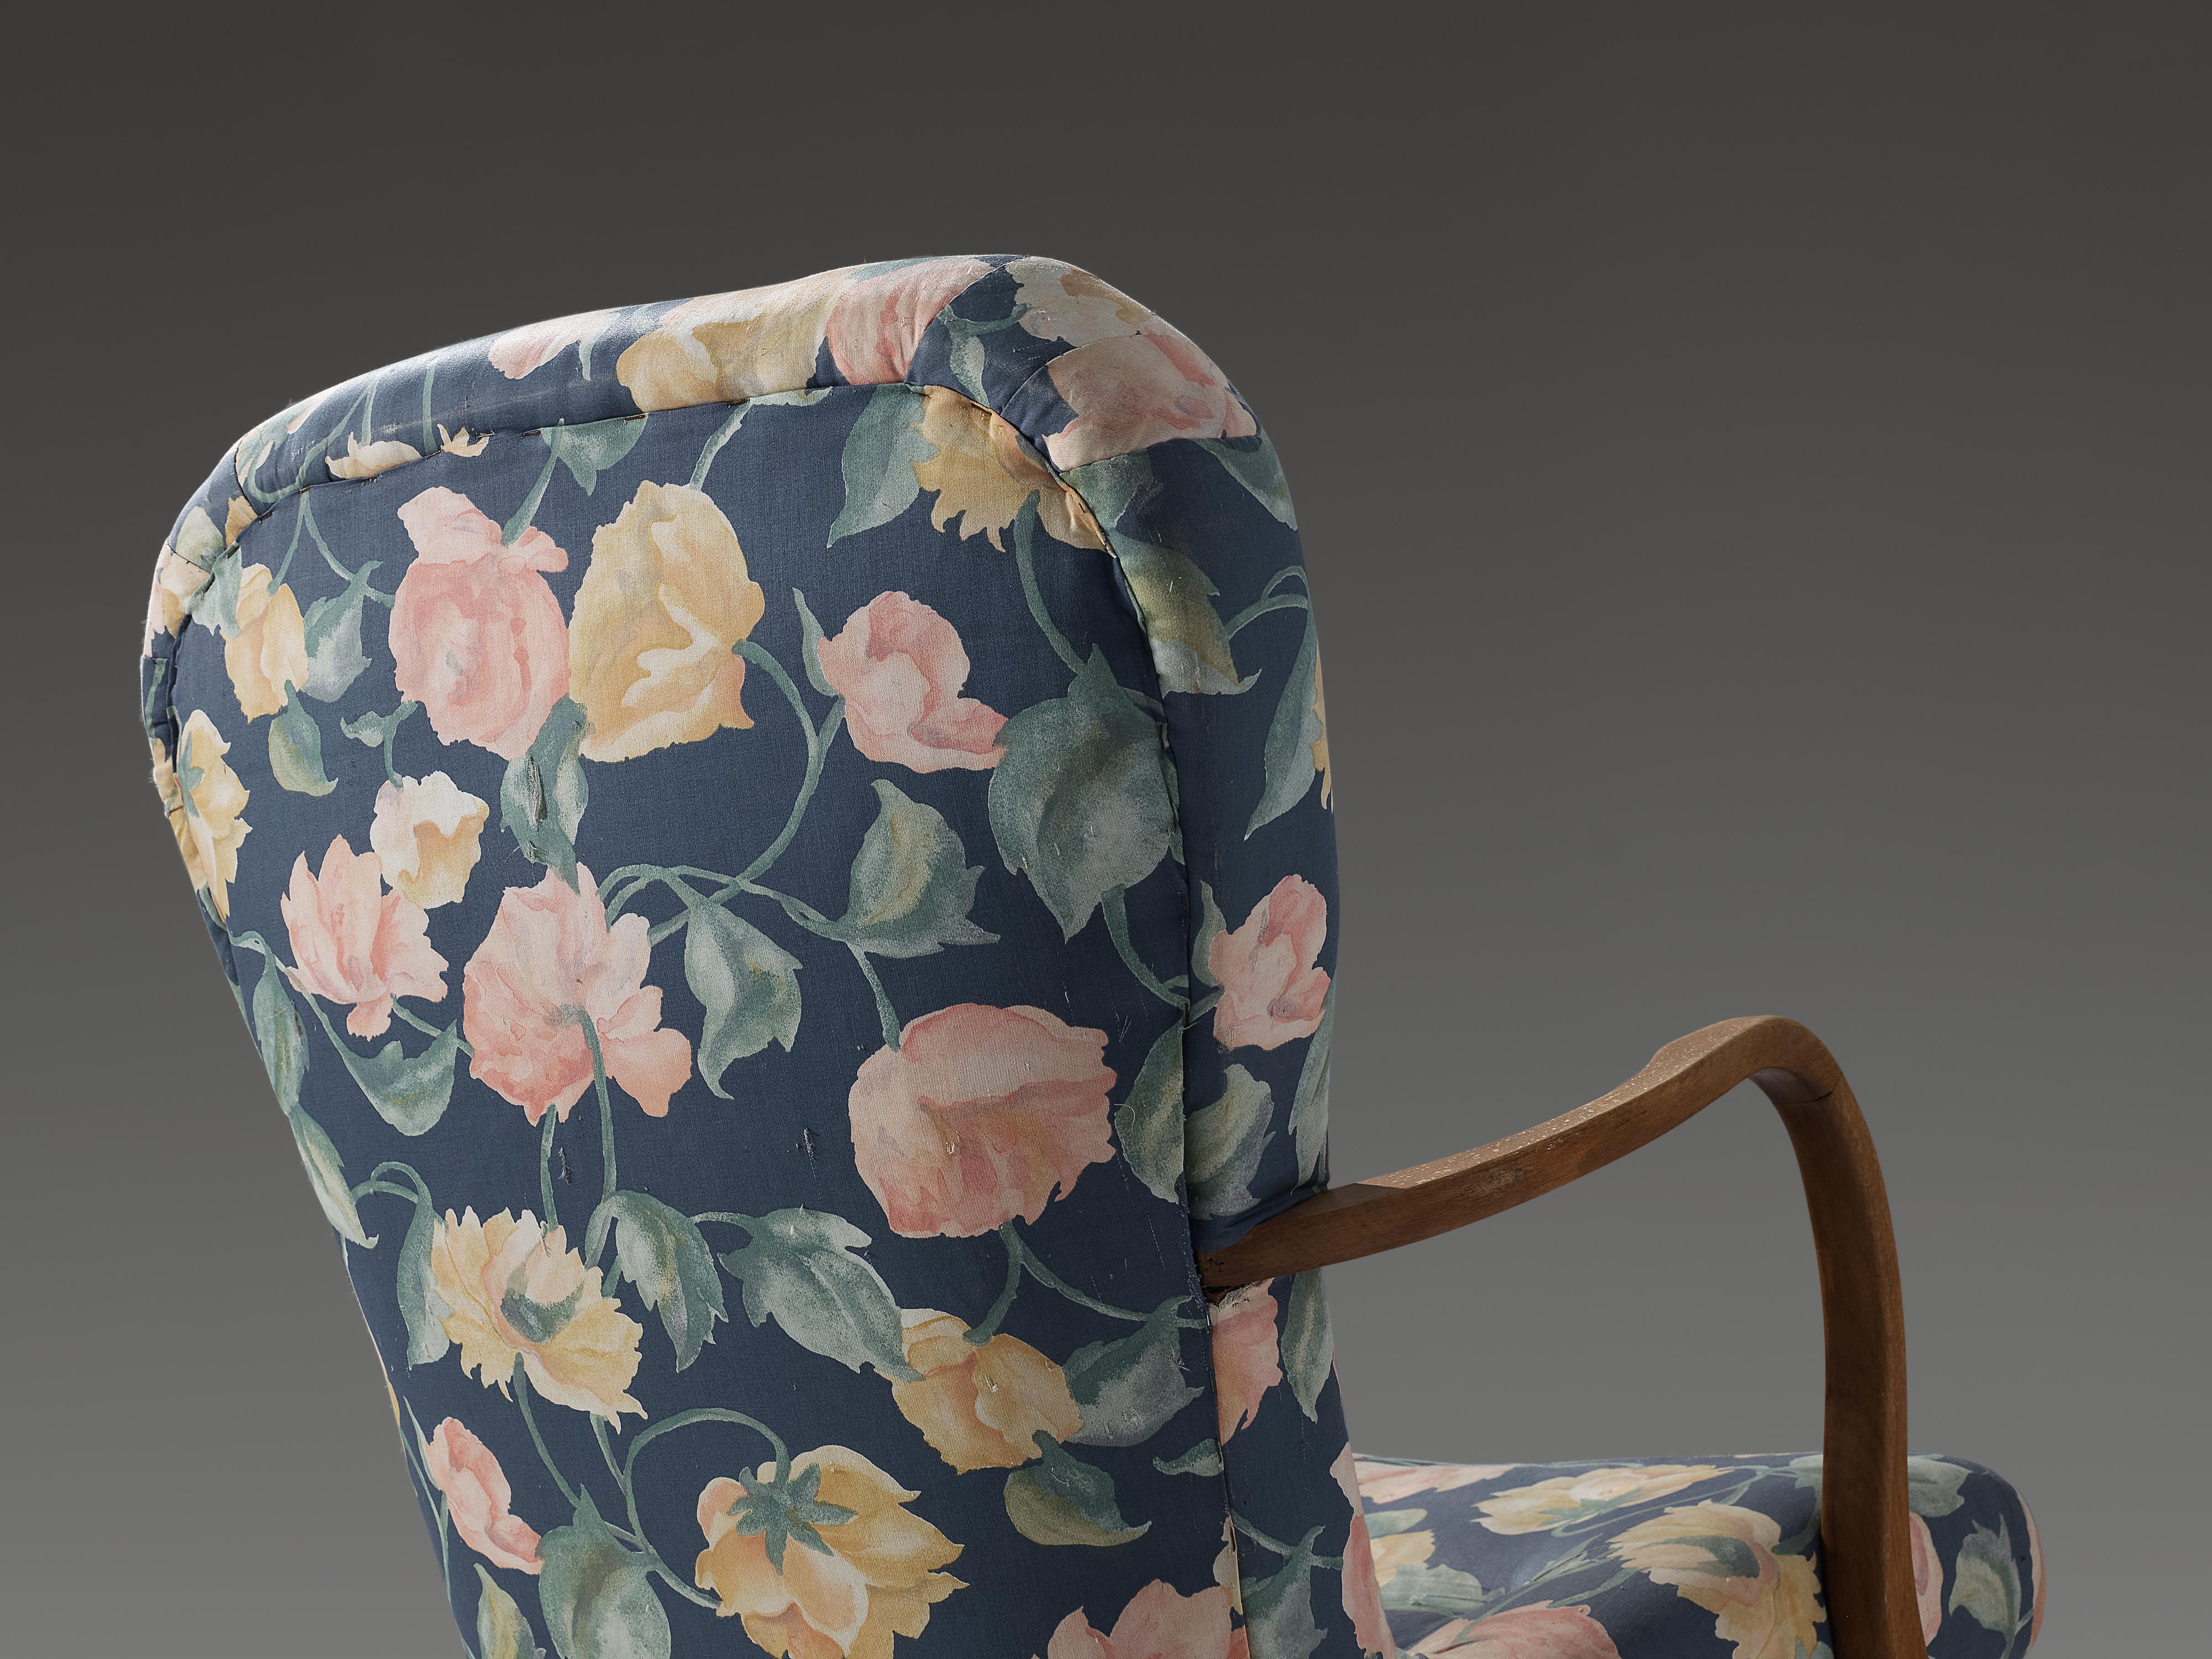 Lounge chair, beech, fabric, Denmark, 1940s

Lounge chair with sculptural armrests. The way the organic armrests add a dynamic touch to the design. The floral upholstery balances this out. Not only is this chair beautiful to look at, it is, thanks